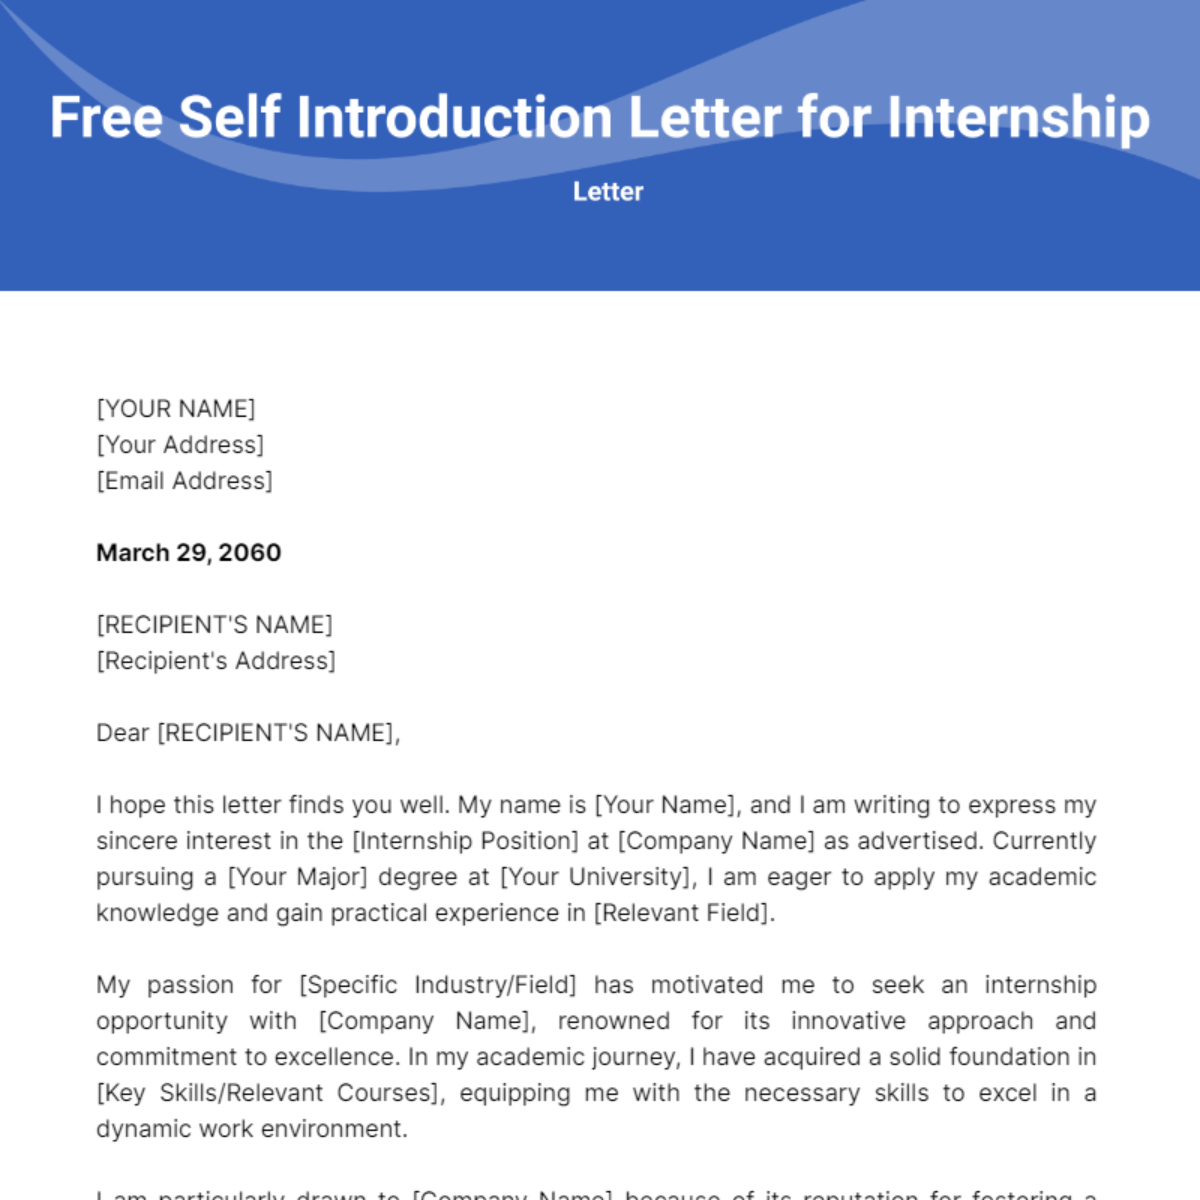 Self Introduction Letter for Internship Template